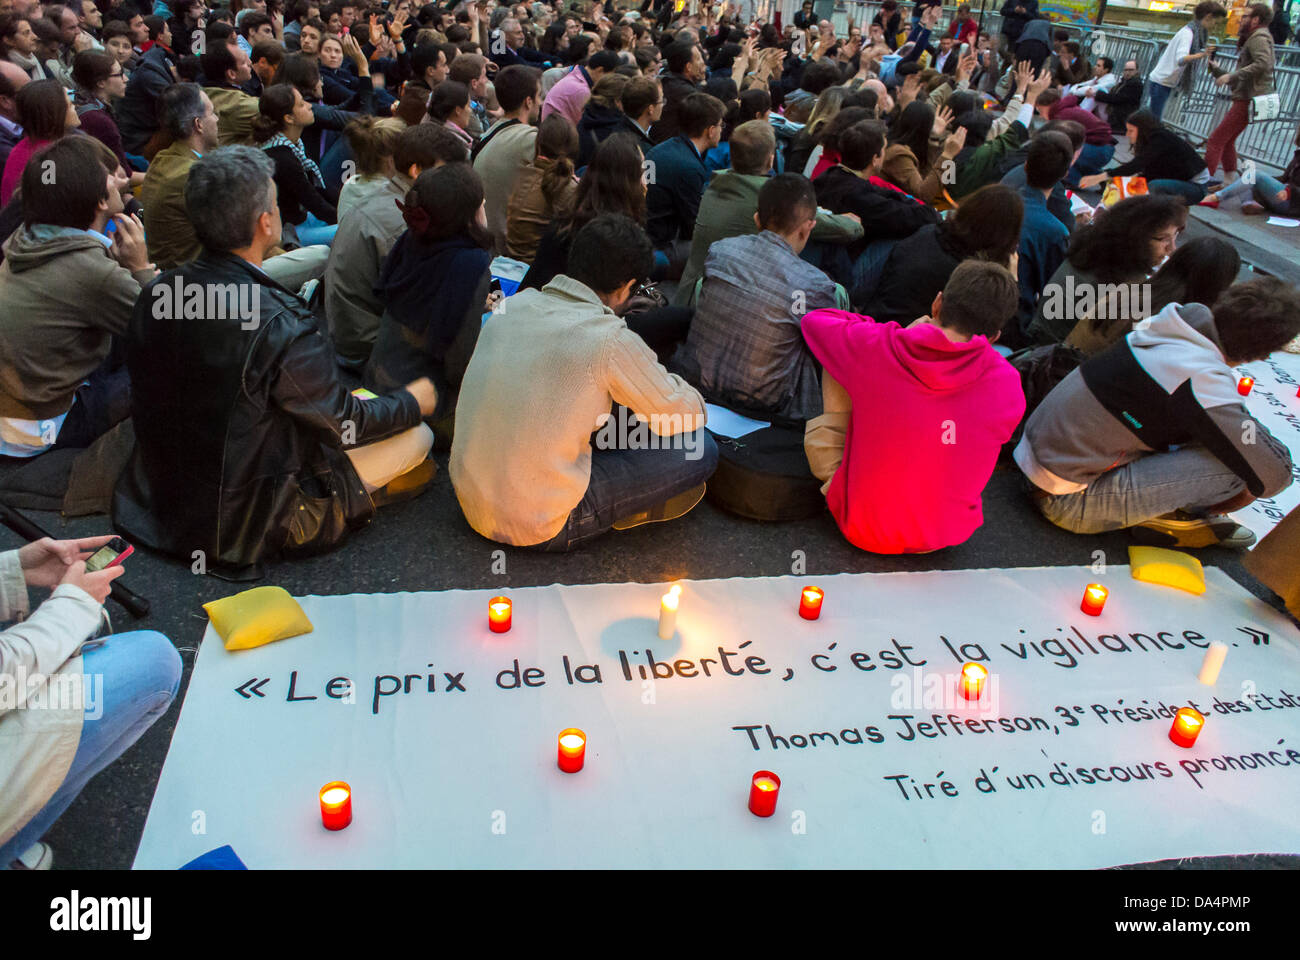 Pa-ris, France. Crowd of People, Sitting From Behind, Far Right Conservative Group 'Les Vielleurs' Demonstration Anti-Gay Marriage, Occupy, different cultures religion, sit in, politics religion Stock Photo